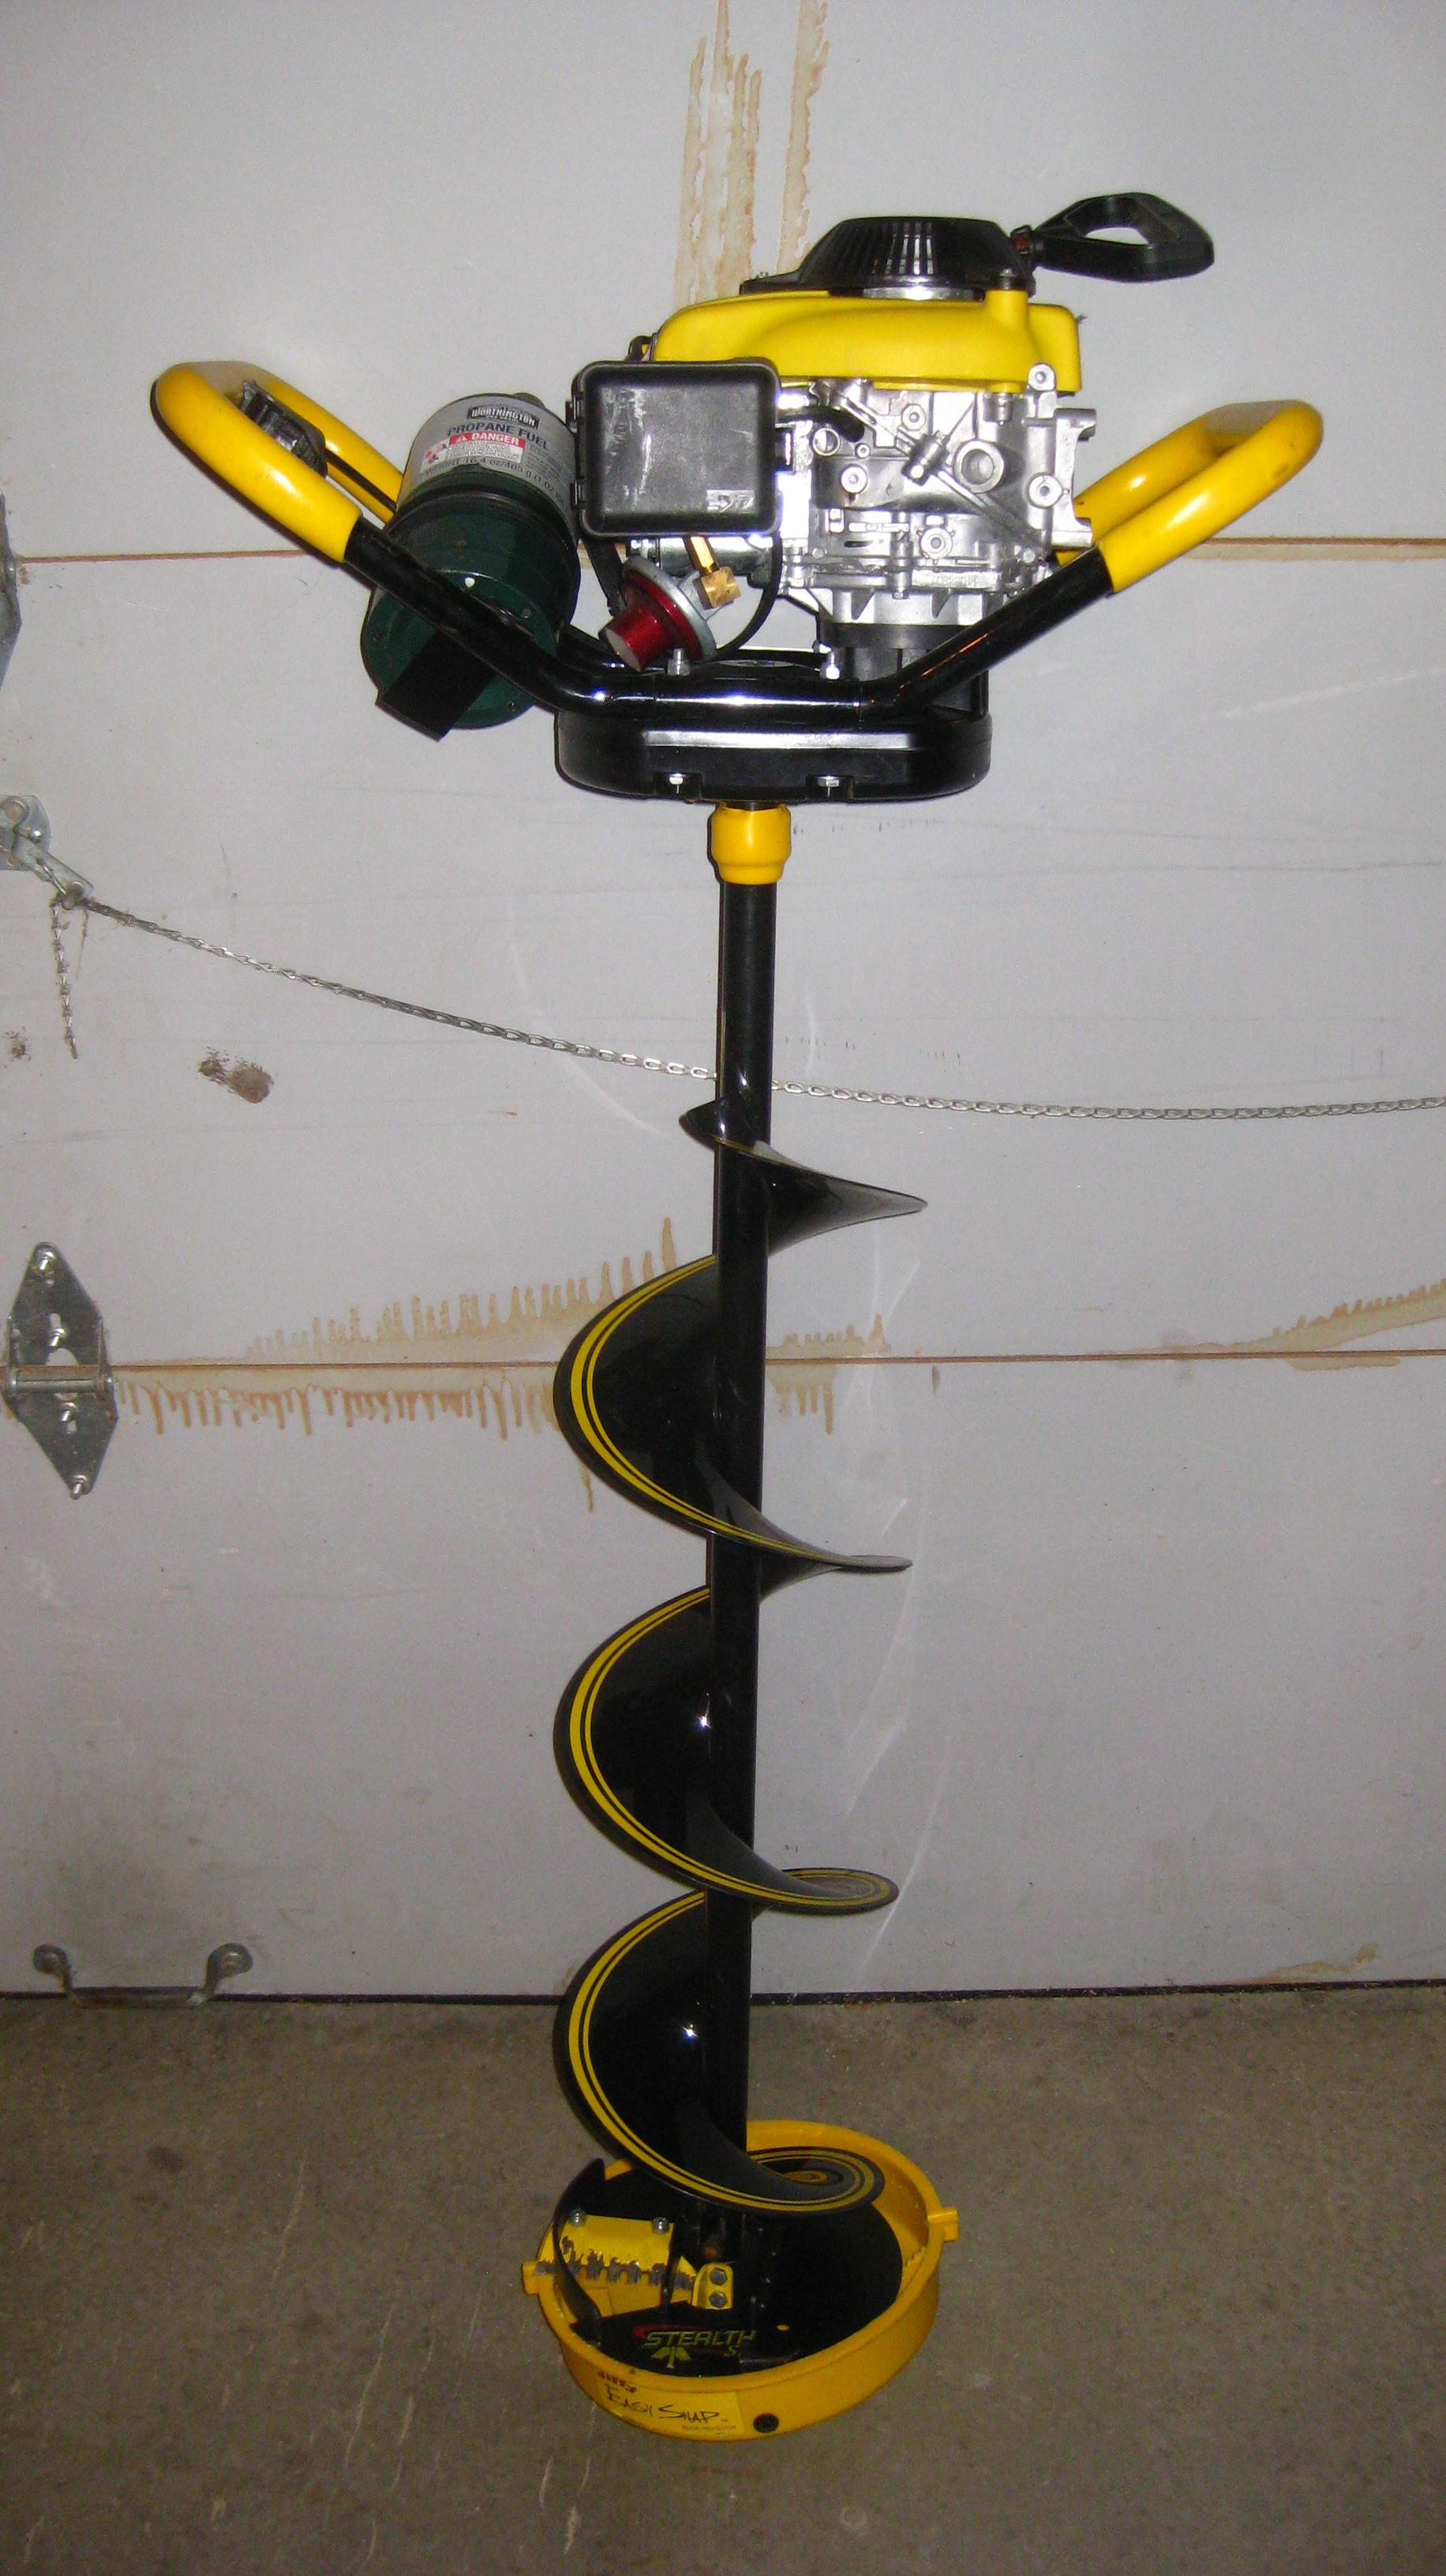 For Sale: 10 Jiffy Pro 4 Propane Ice Auger - FREE LISTING-FOR SALE! List  Your Boats, Fishing, Hunting, Employment & Used Items! - FM 'Members' -  Outdoor Minnesota Fishing Reports - Hunting Forum - Ice Fishing